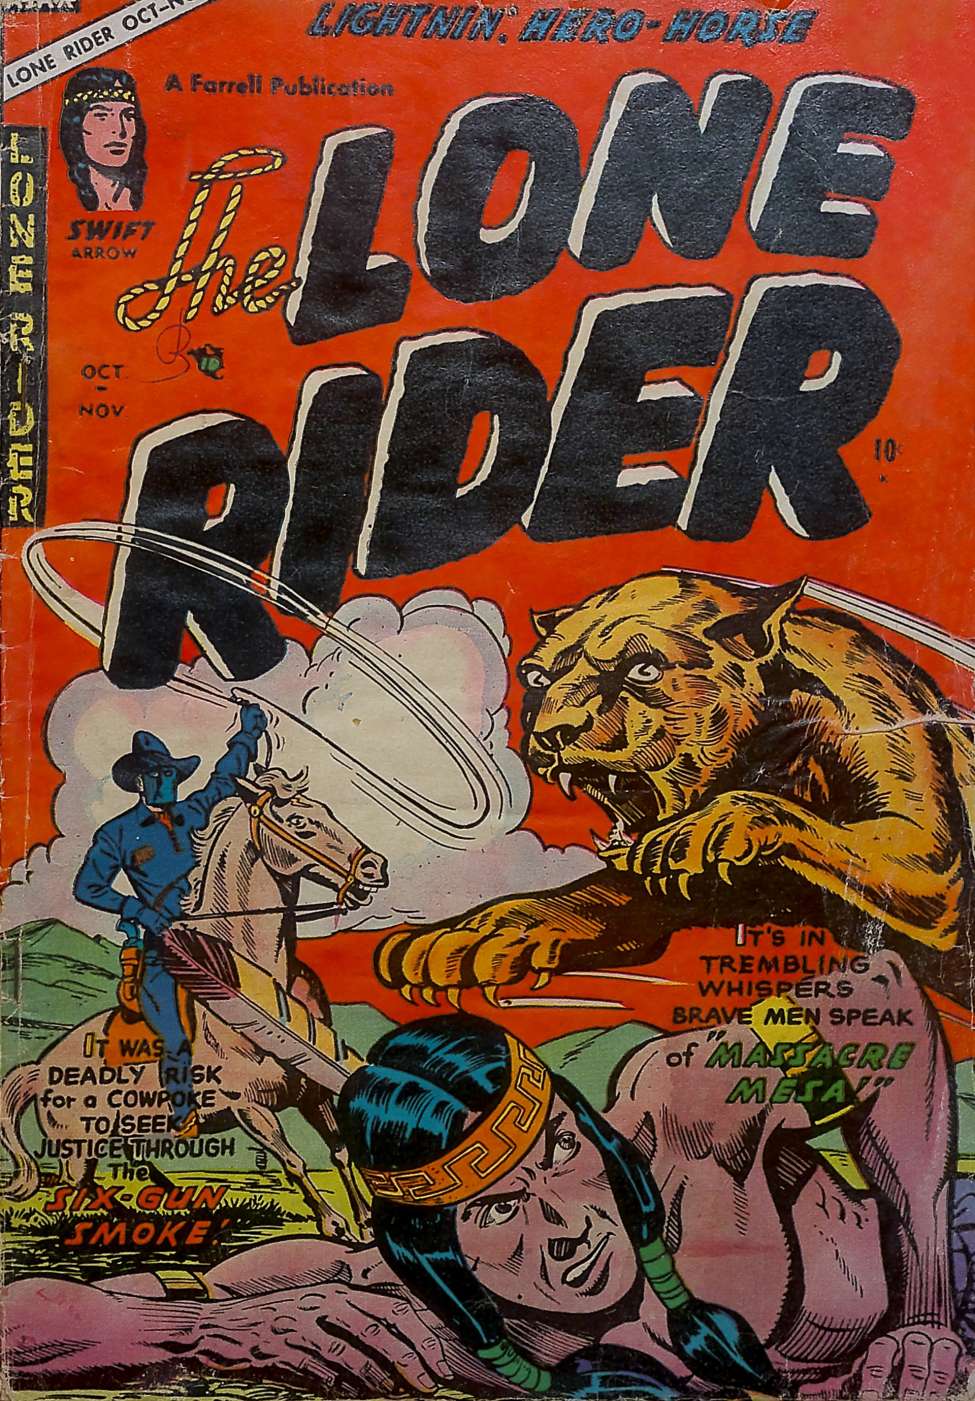 Book Cover For The Lone Rider 22 - Version 2